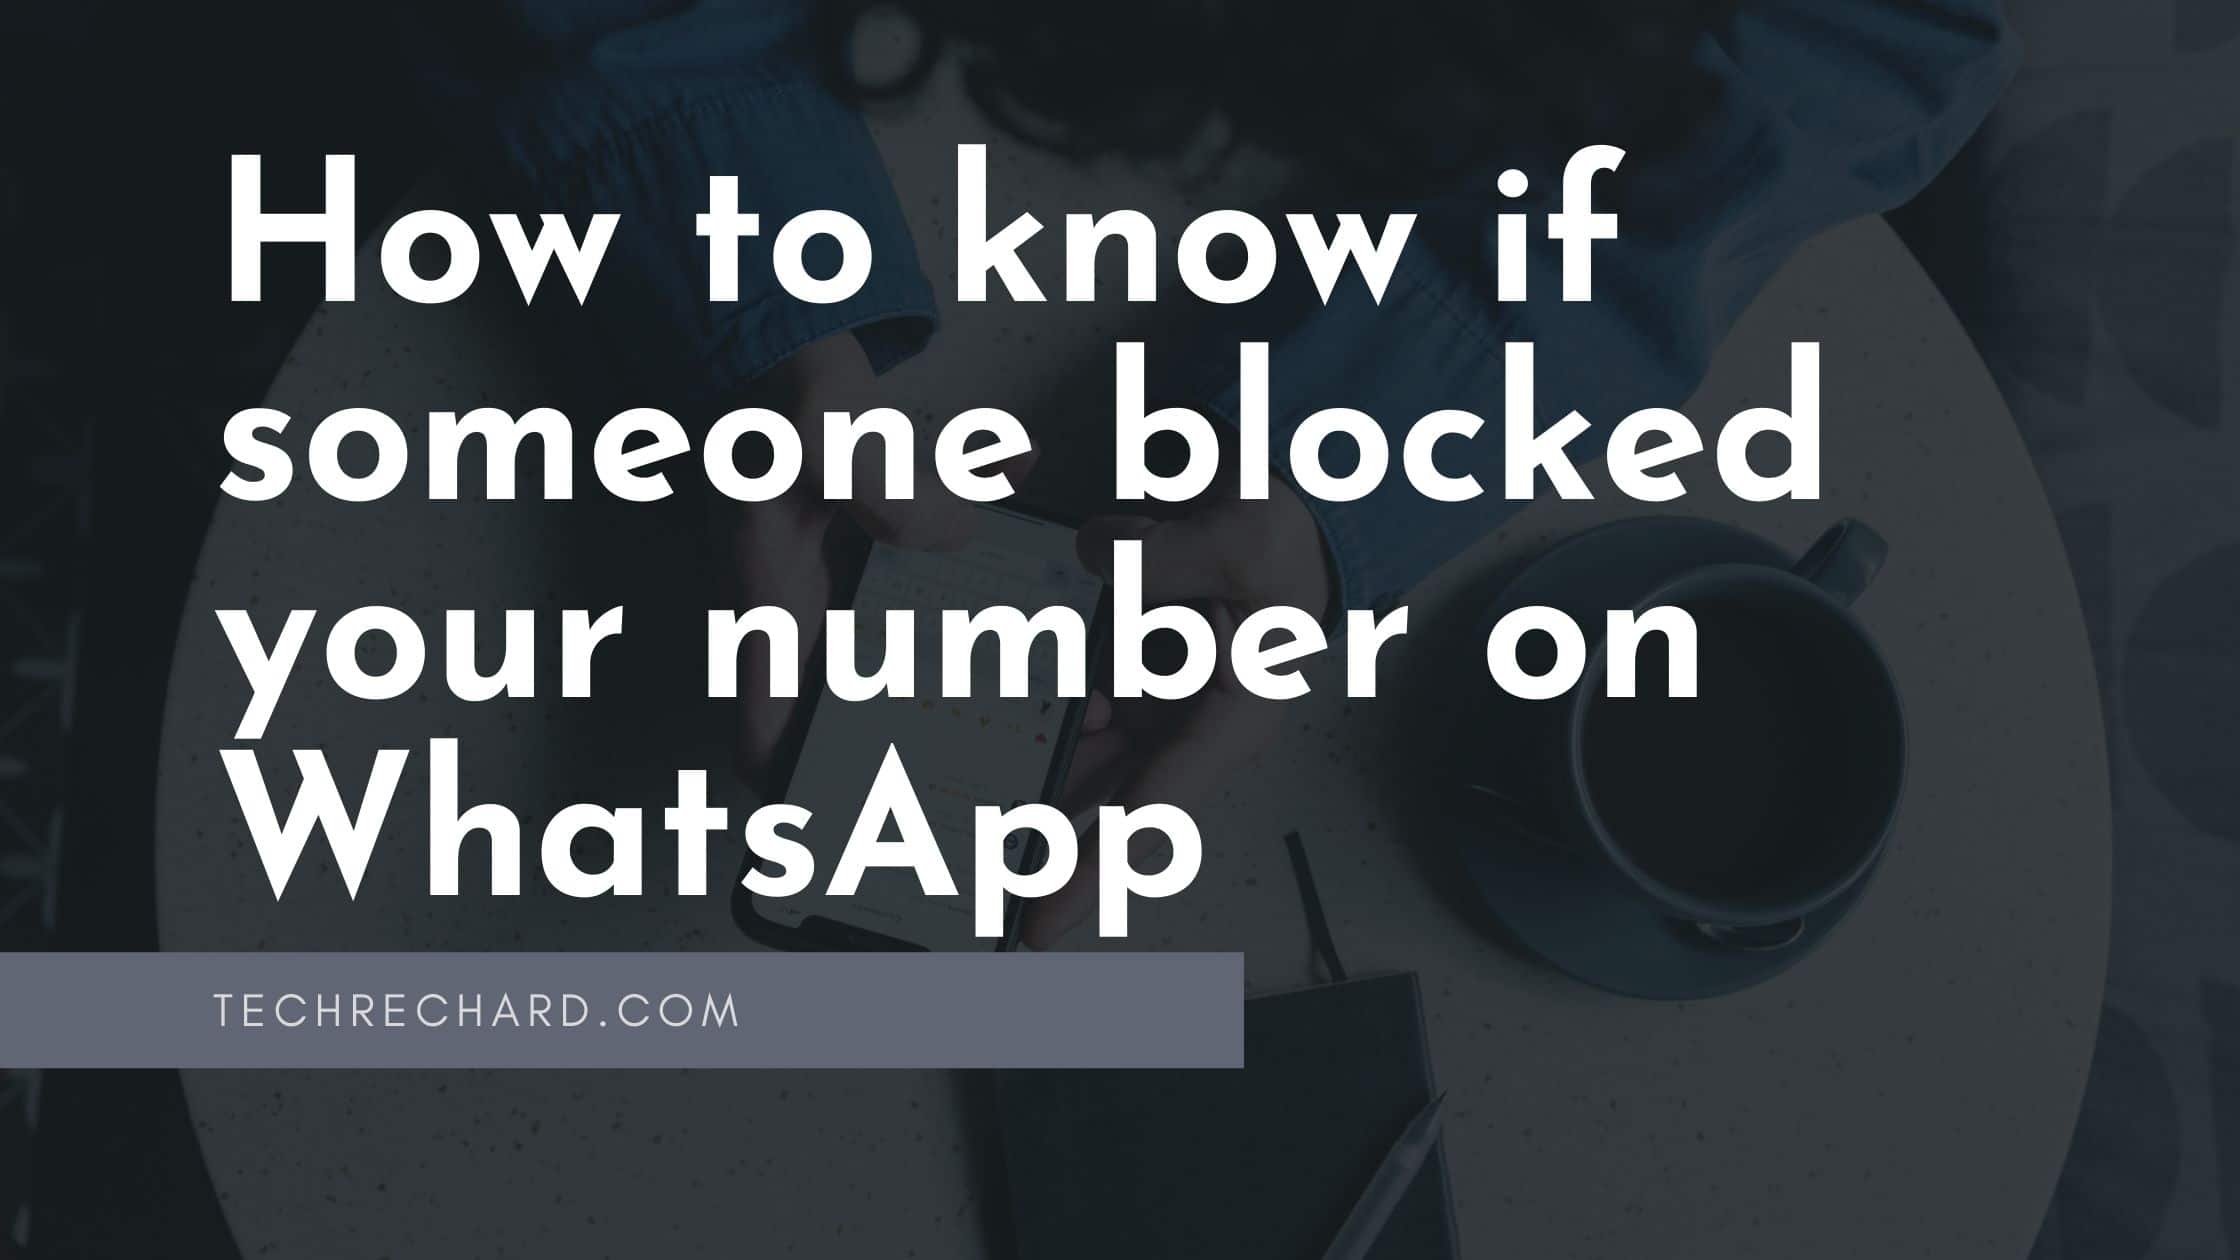 How to know if someone blocked your number on WhatsApp